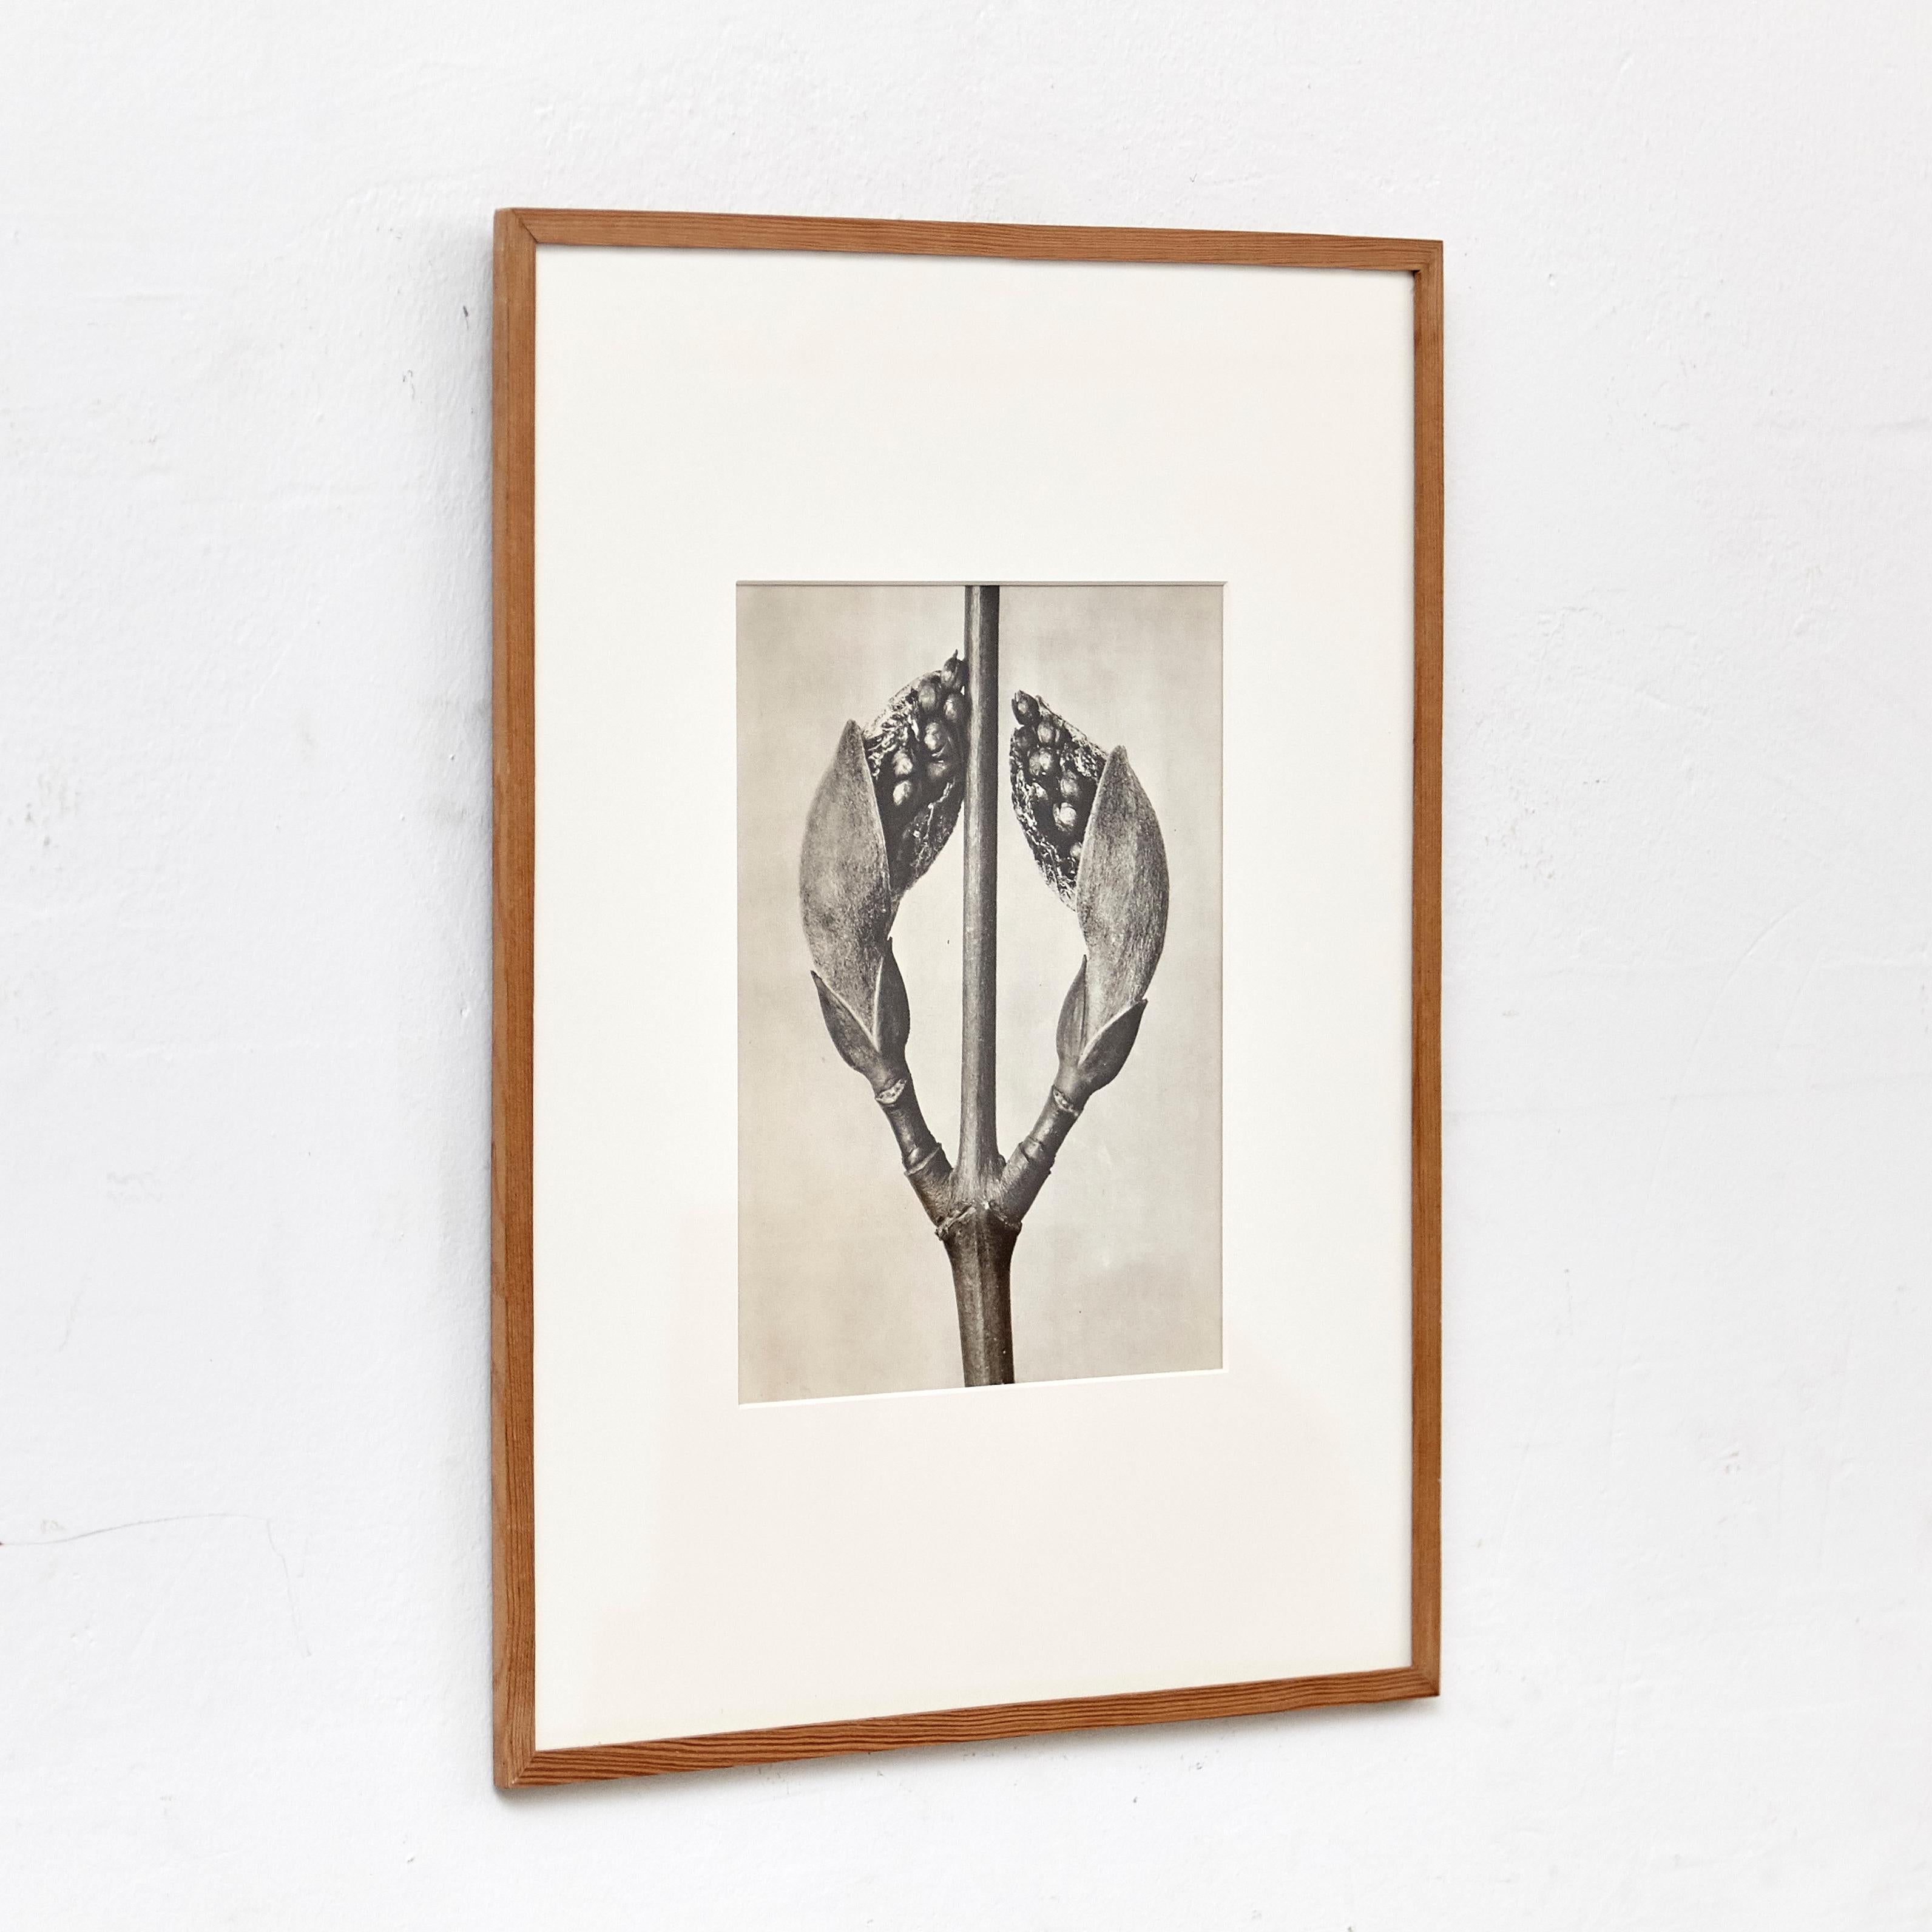 Karl Blossfeldt Photogravure from the edition of the book 'Wunder in der Natur' in 1942.

Photography number 23. 'Acer Rufinerve. Ahorn. Sprossen in 10 facher Vergrößerung.'

In original condition, with minor wear consistent with age and use,